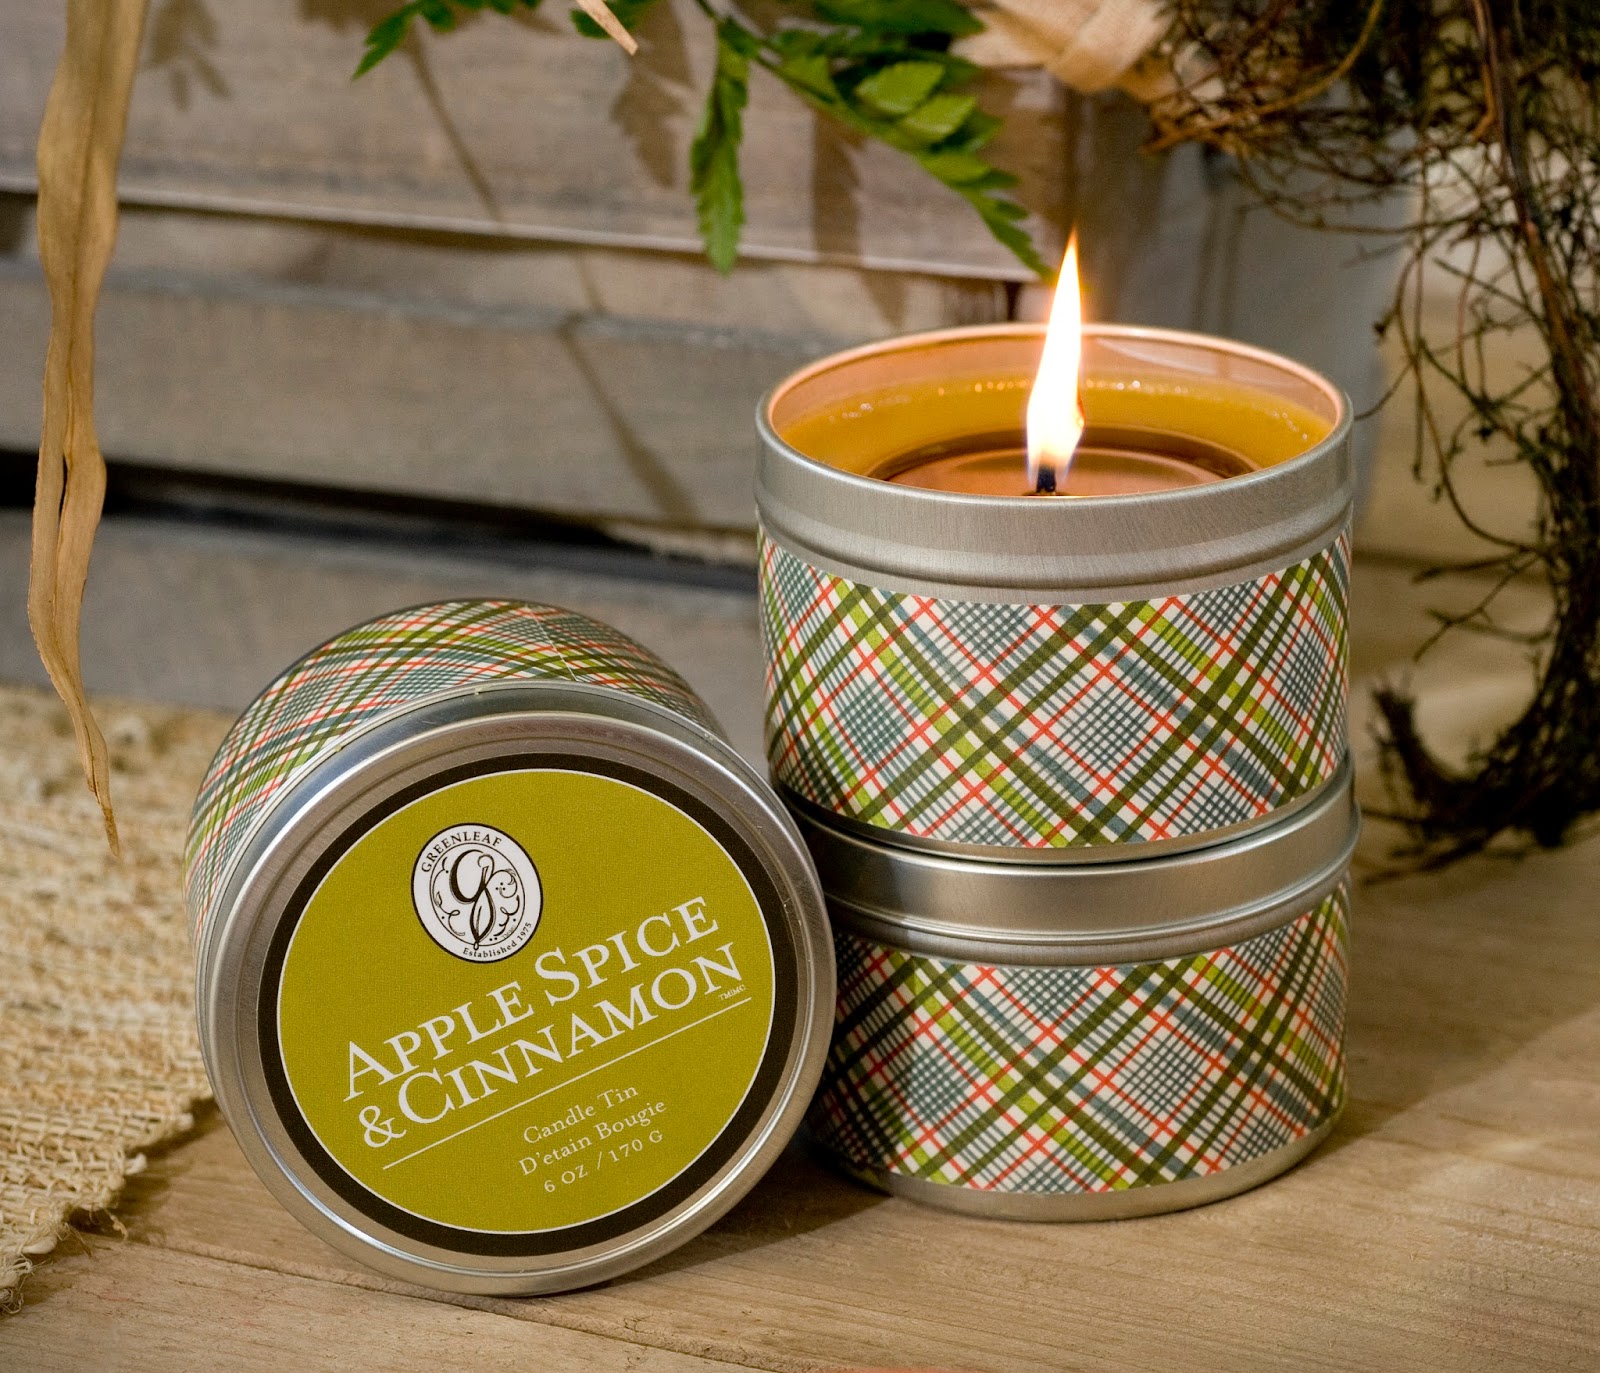 Every Year Thousands Of People Across The Uk Light Candles In Their Quest To Create Perfect Christmas Ambiance With This Mind We Thought What Better